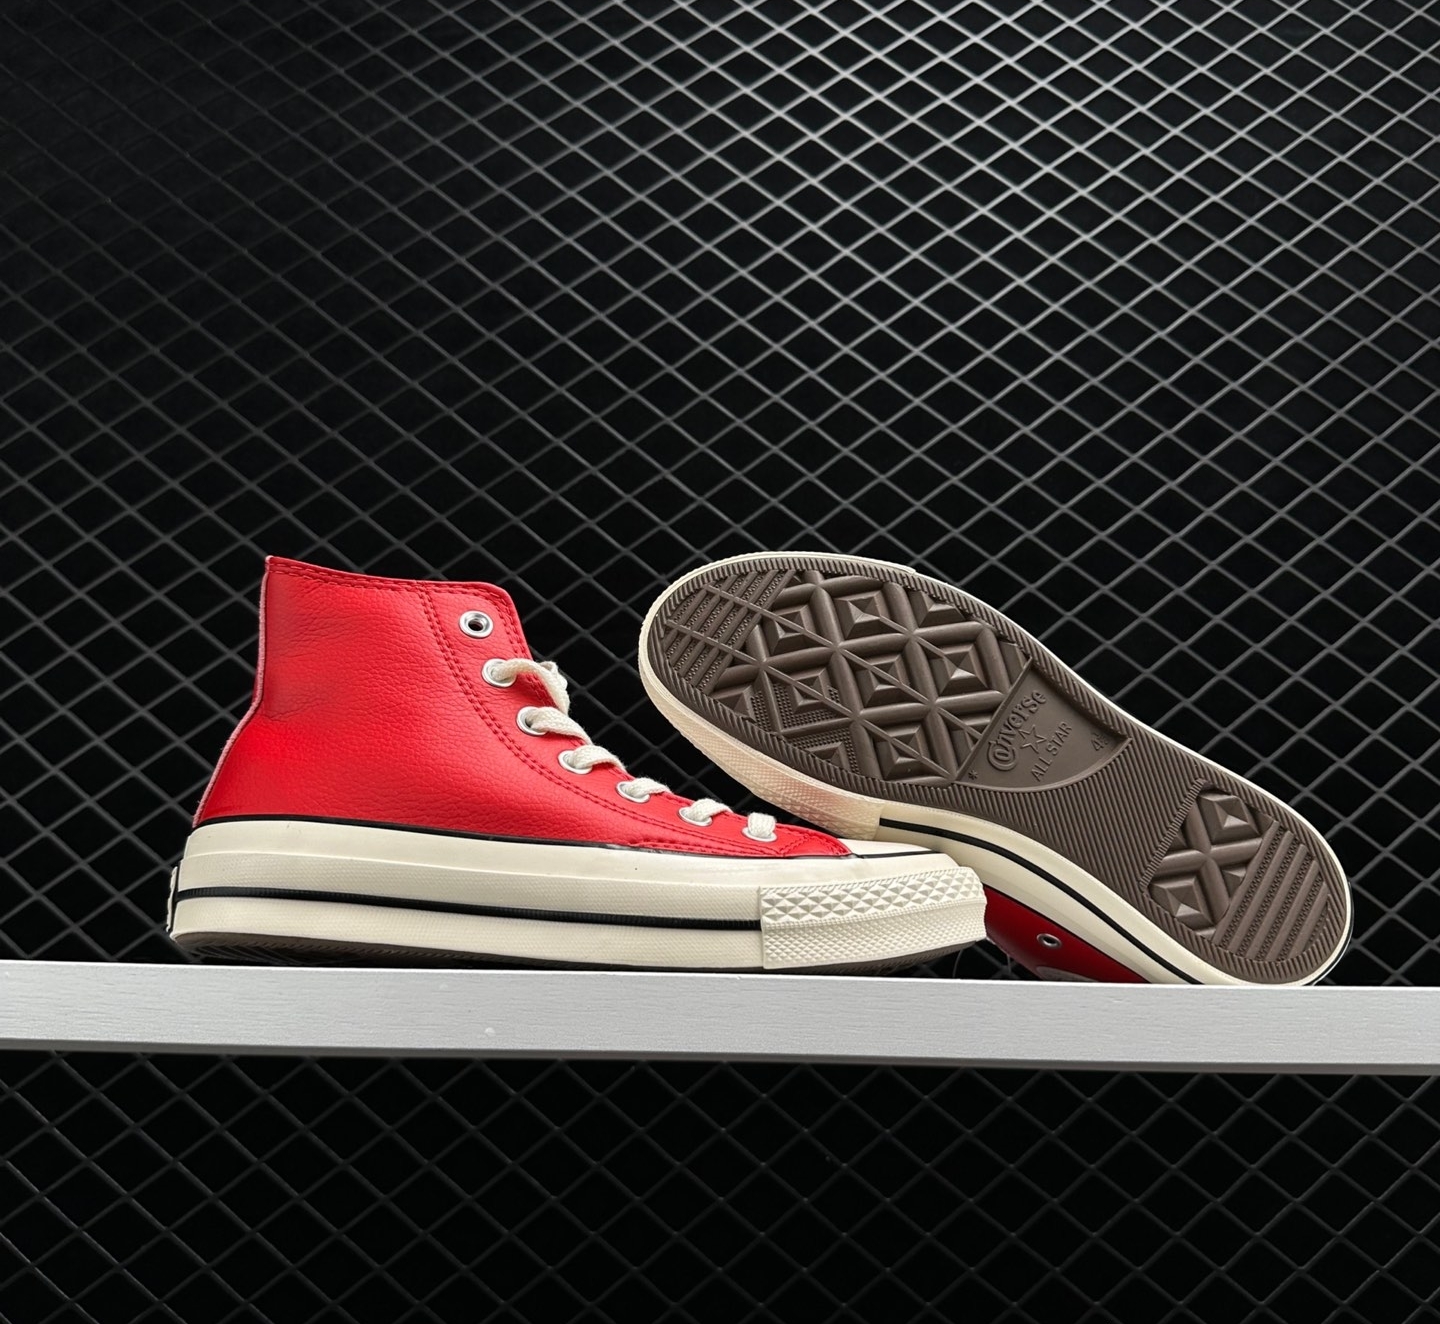 Converse Chuck 70 High 'University Red' 170370C - Classic Style & Vibrant Color | Limited Stock